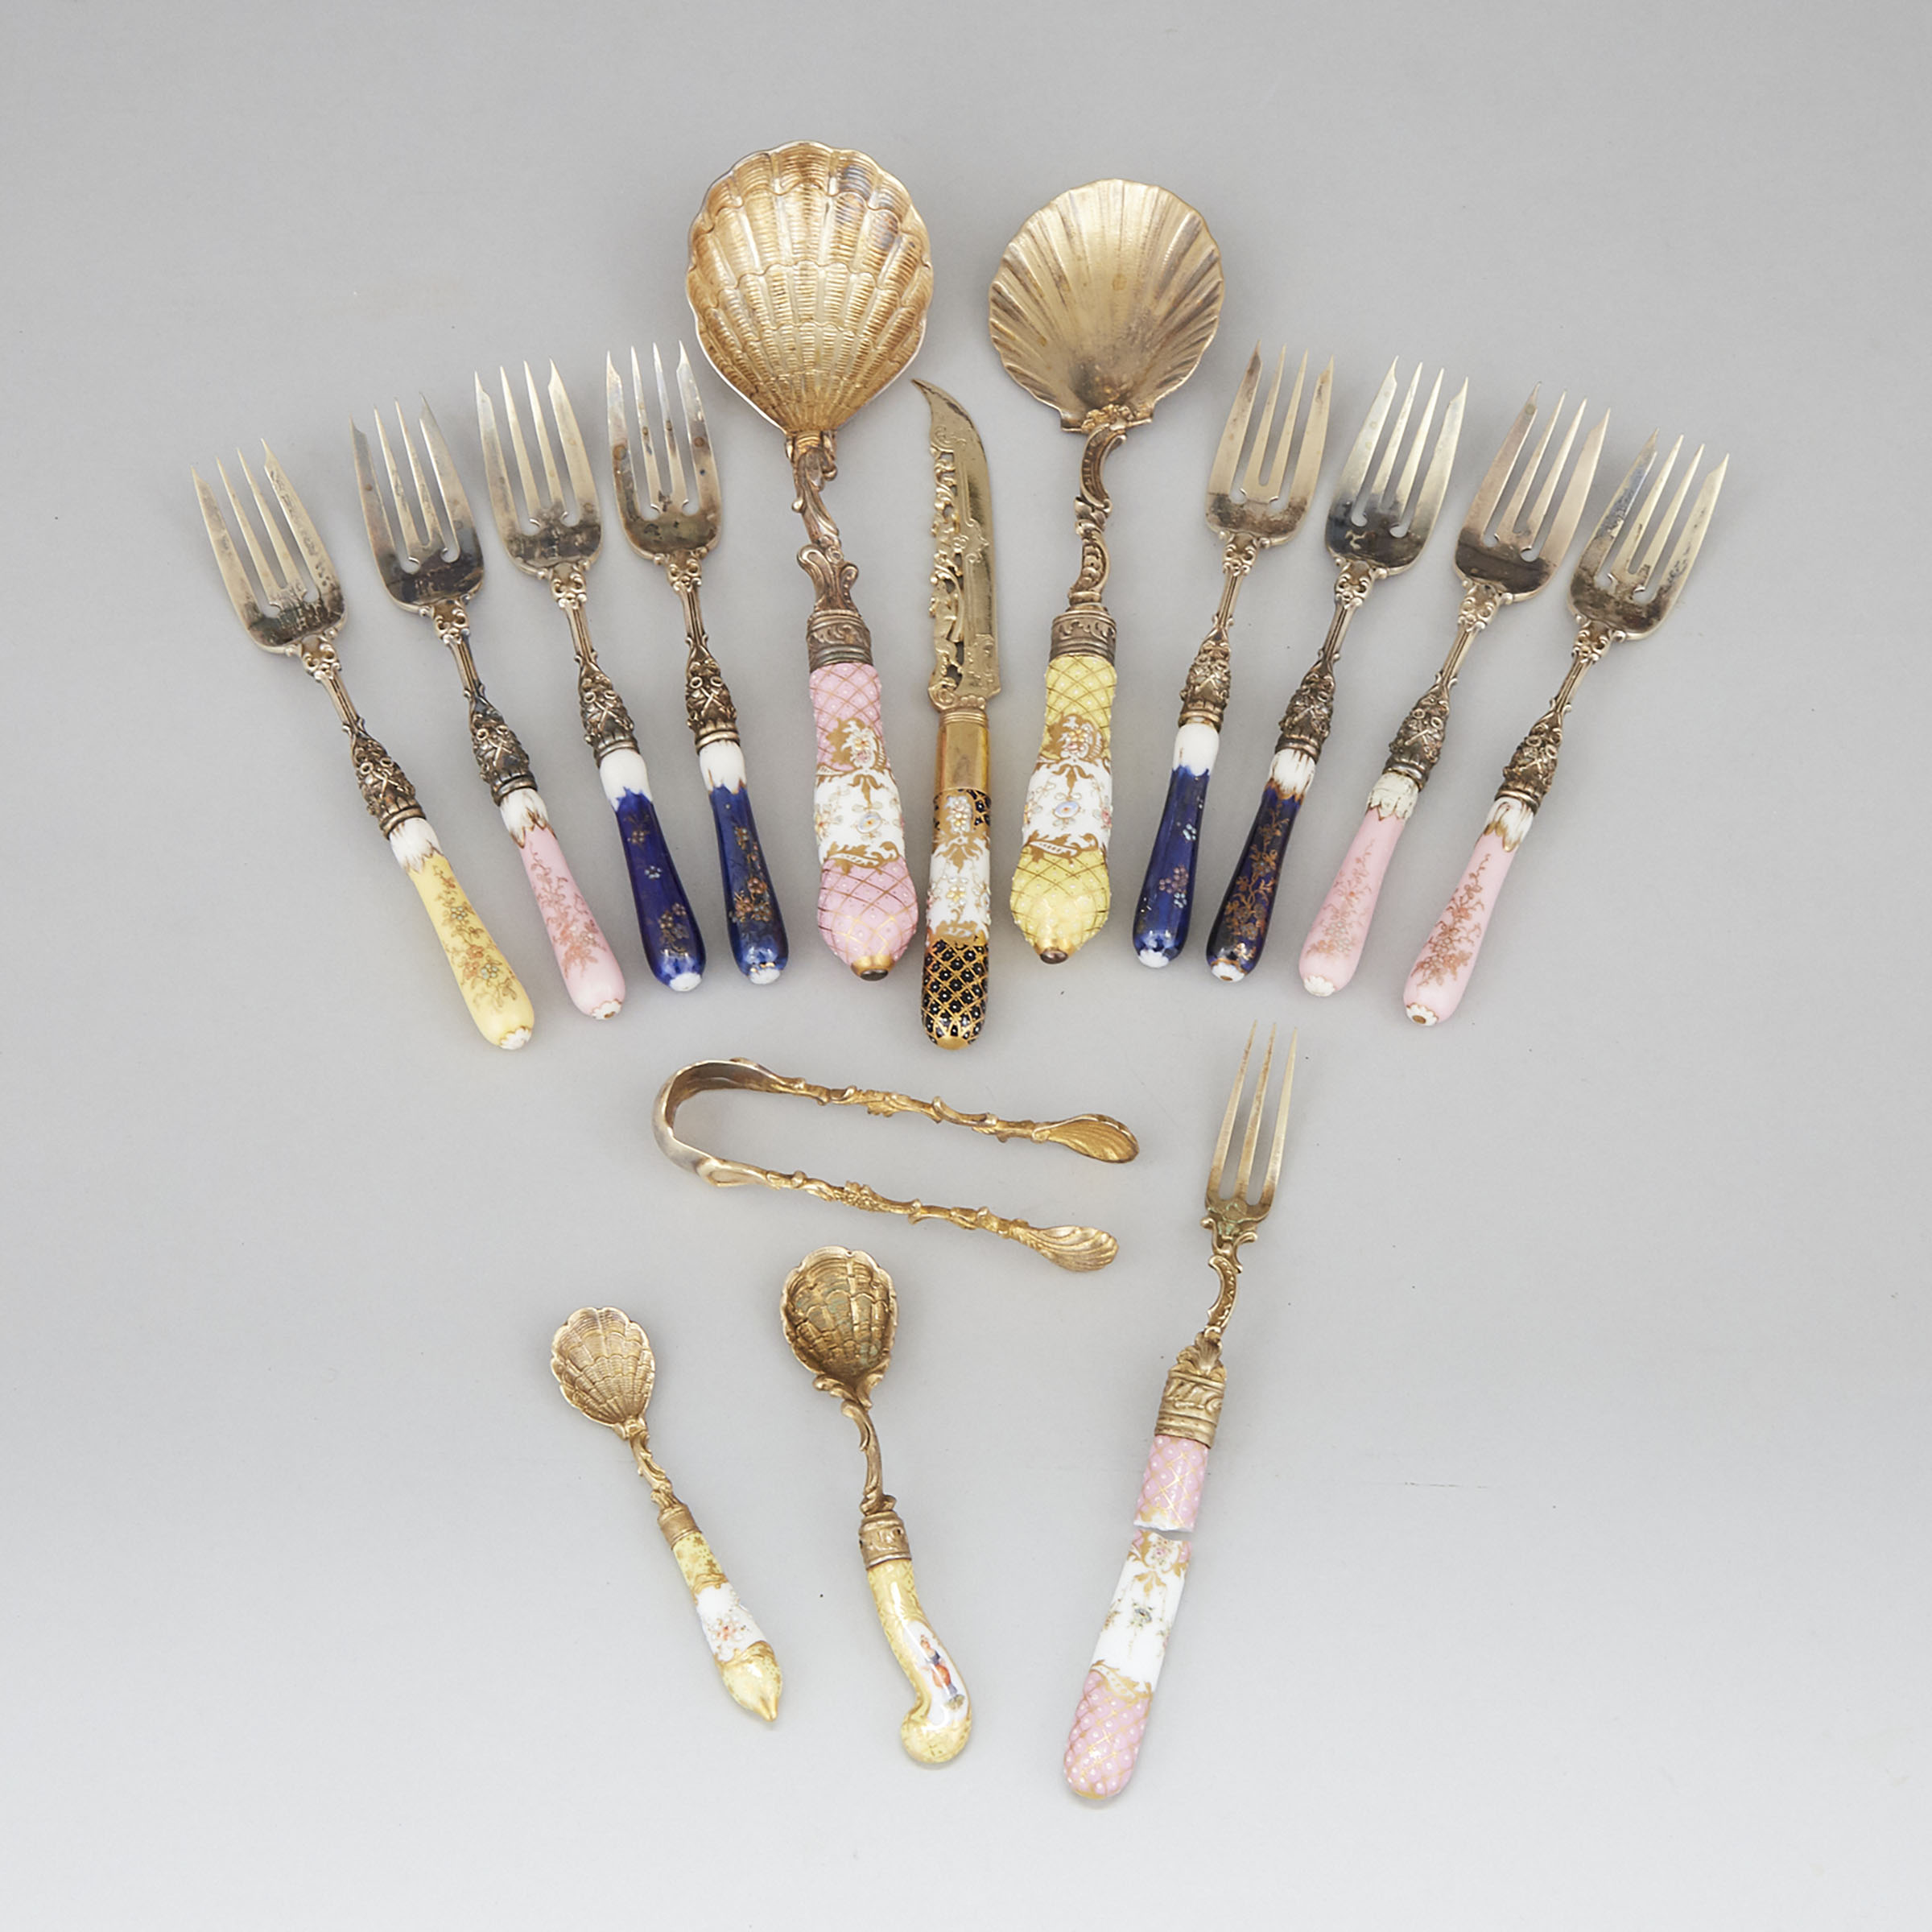 Two German Porcelain Handled Silver-Gilt Serving Spoons, Dessert Knife, Nine Forks, Two Salt Spoons and Complementary Sugar Tongs, c.1900